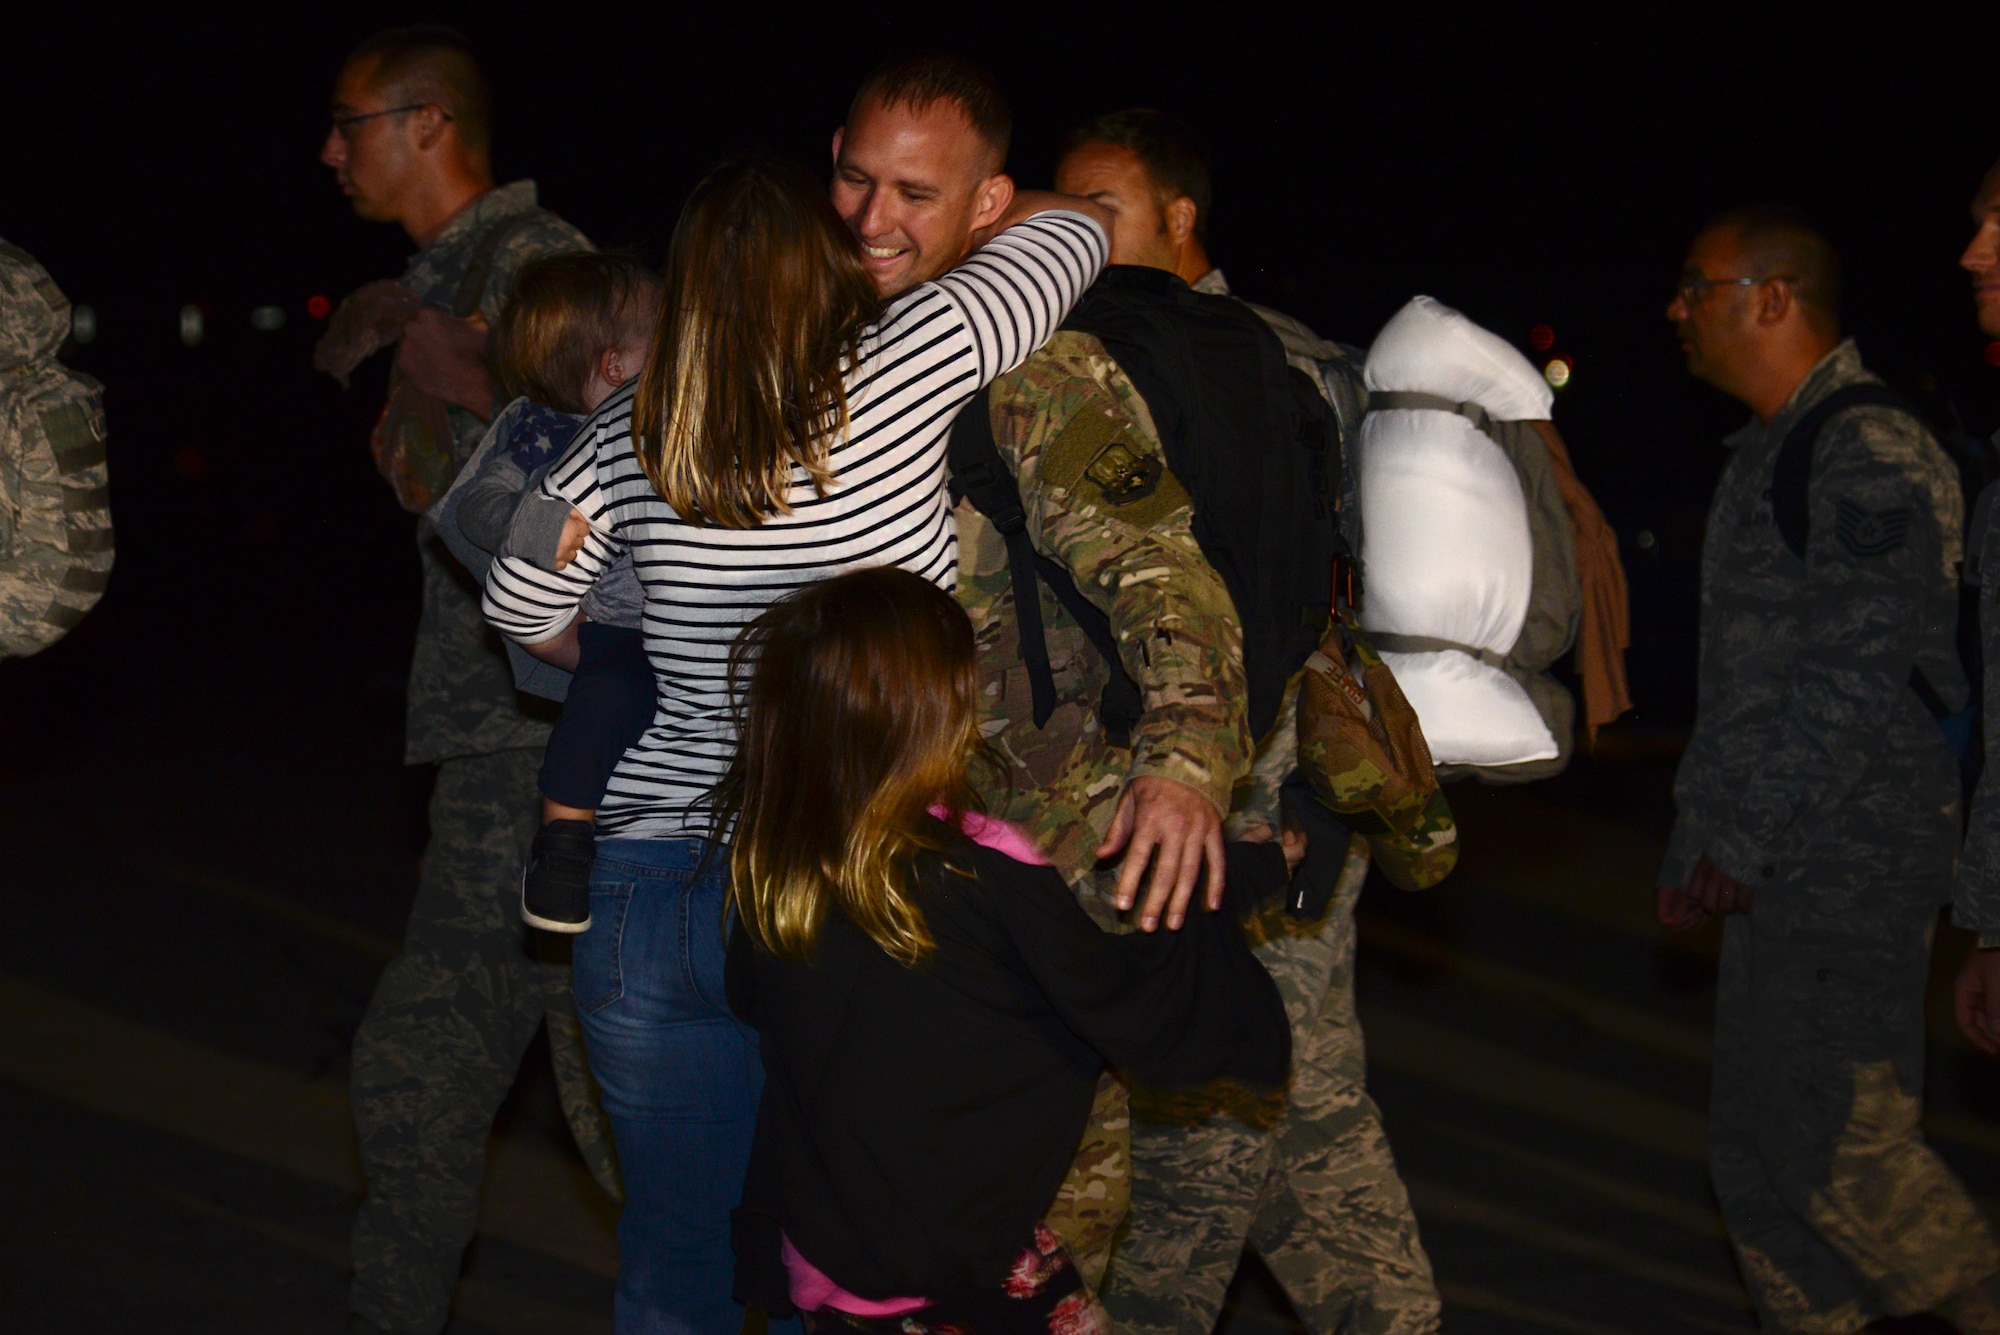 Master Sgt. Steven Graff, the 28th Maintenance Squadron noncommissioned officer in charge of egress, hugs his family as he lands back at Ellsworth Air Force Base, S.D., after a six-month deployment to Al Udeid Air Base, Qatar, Sept. 18, 2018. The 28th Bomb Wing deployed B-1s, Airmen and support equipment to fly missions in the U.S. Central Command area of responsibility. (U.S. Air Force photo by Senior Airman Denise M. Jenson)